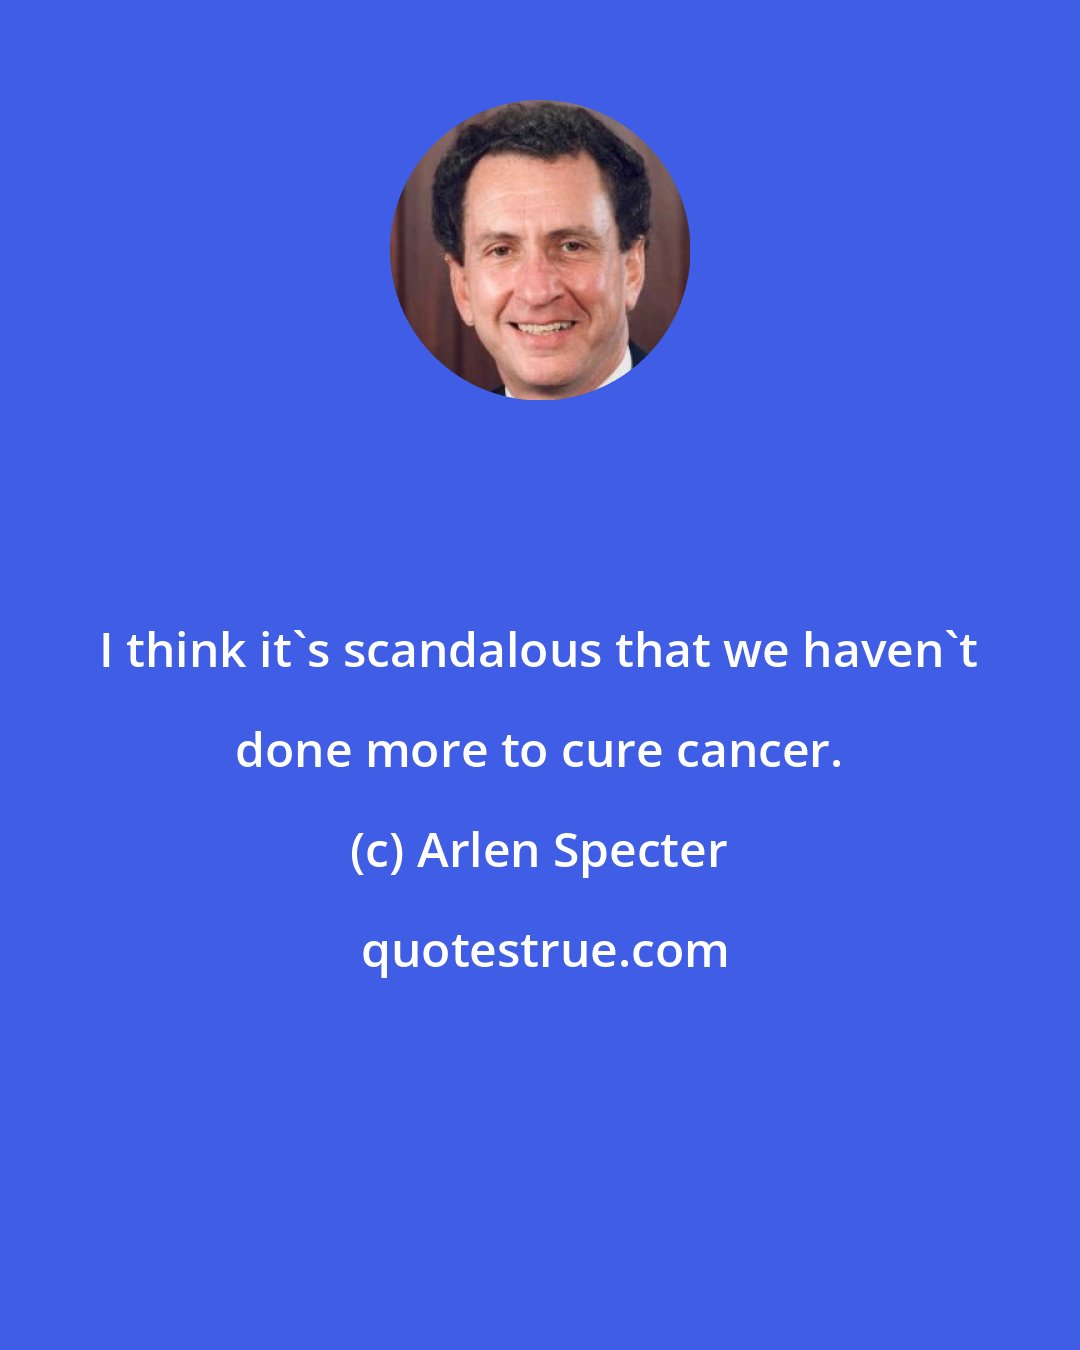 Arlen Specter: I think it's scandalous that we haven't done more to cure cancer.